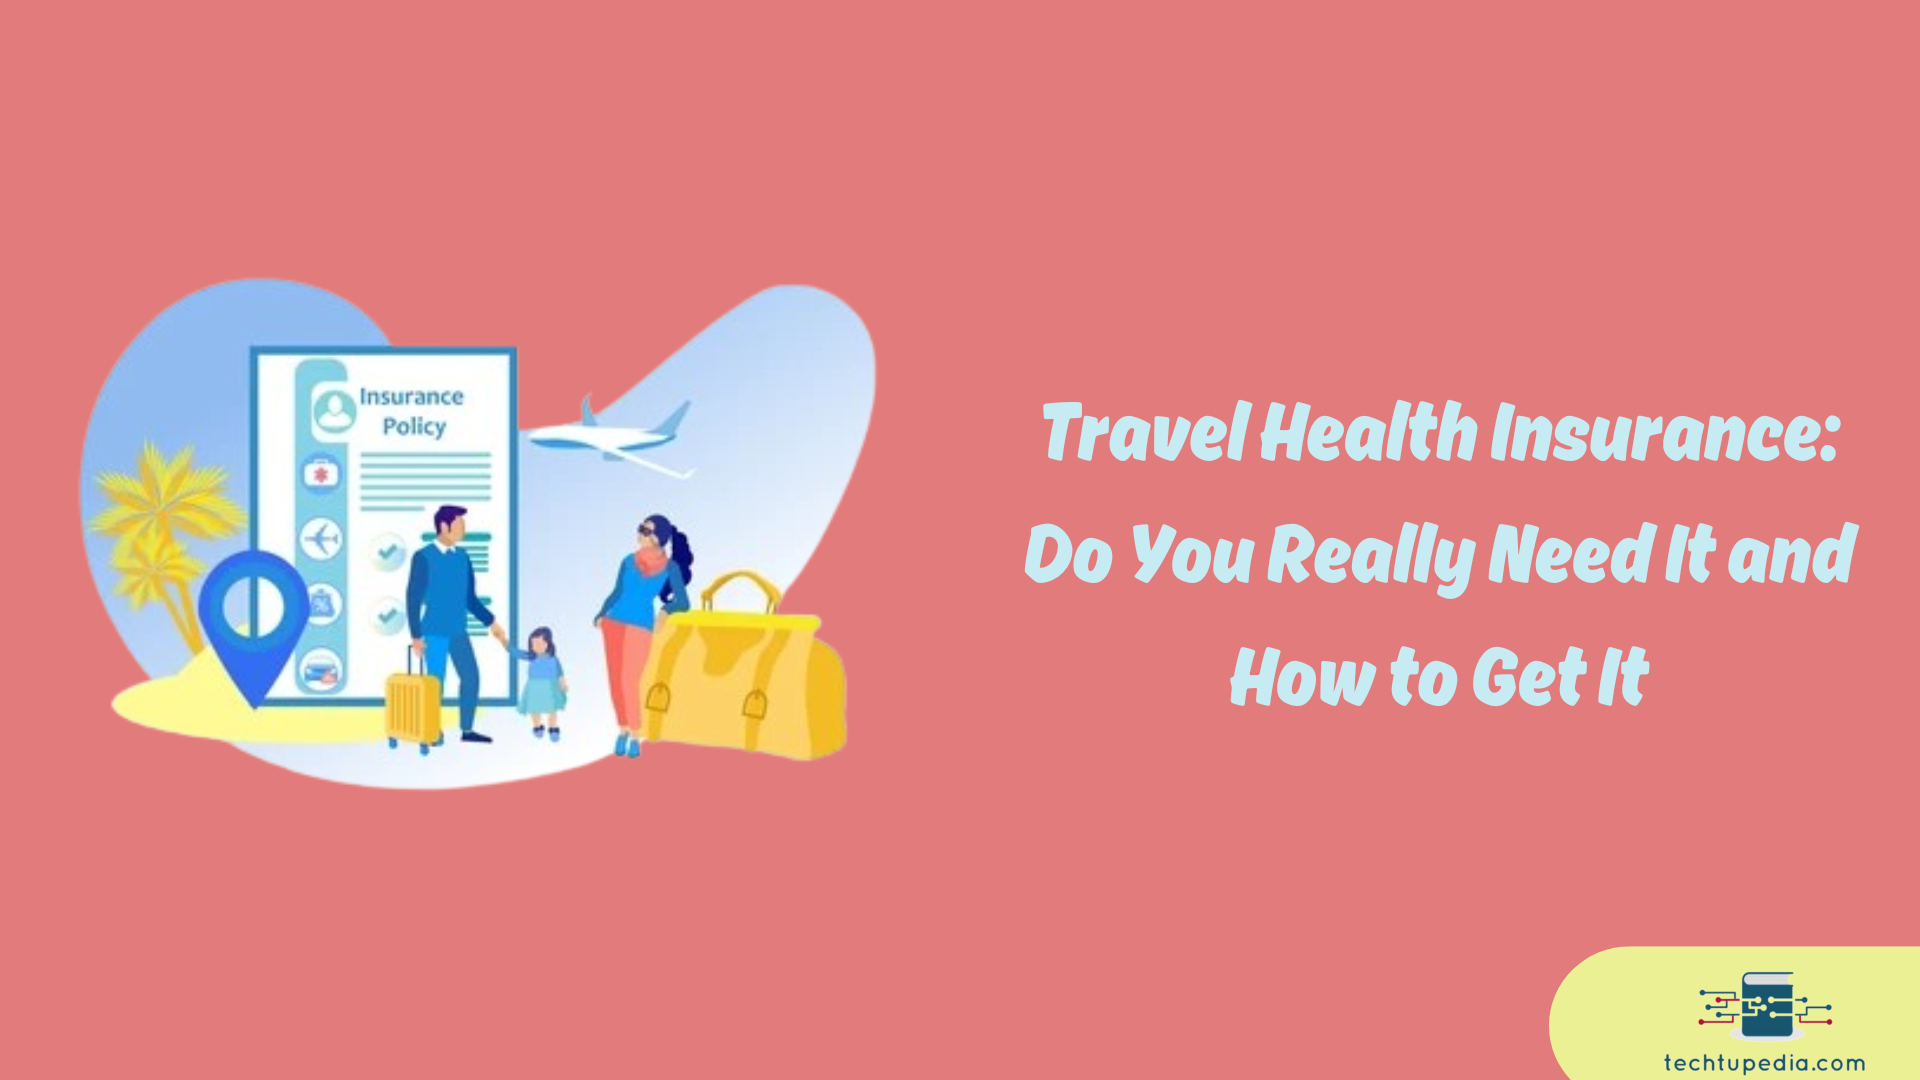 Travel Health Insurance: Do You Really Need It and How to Get It